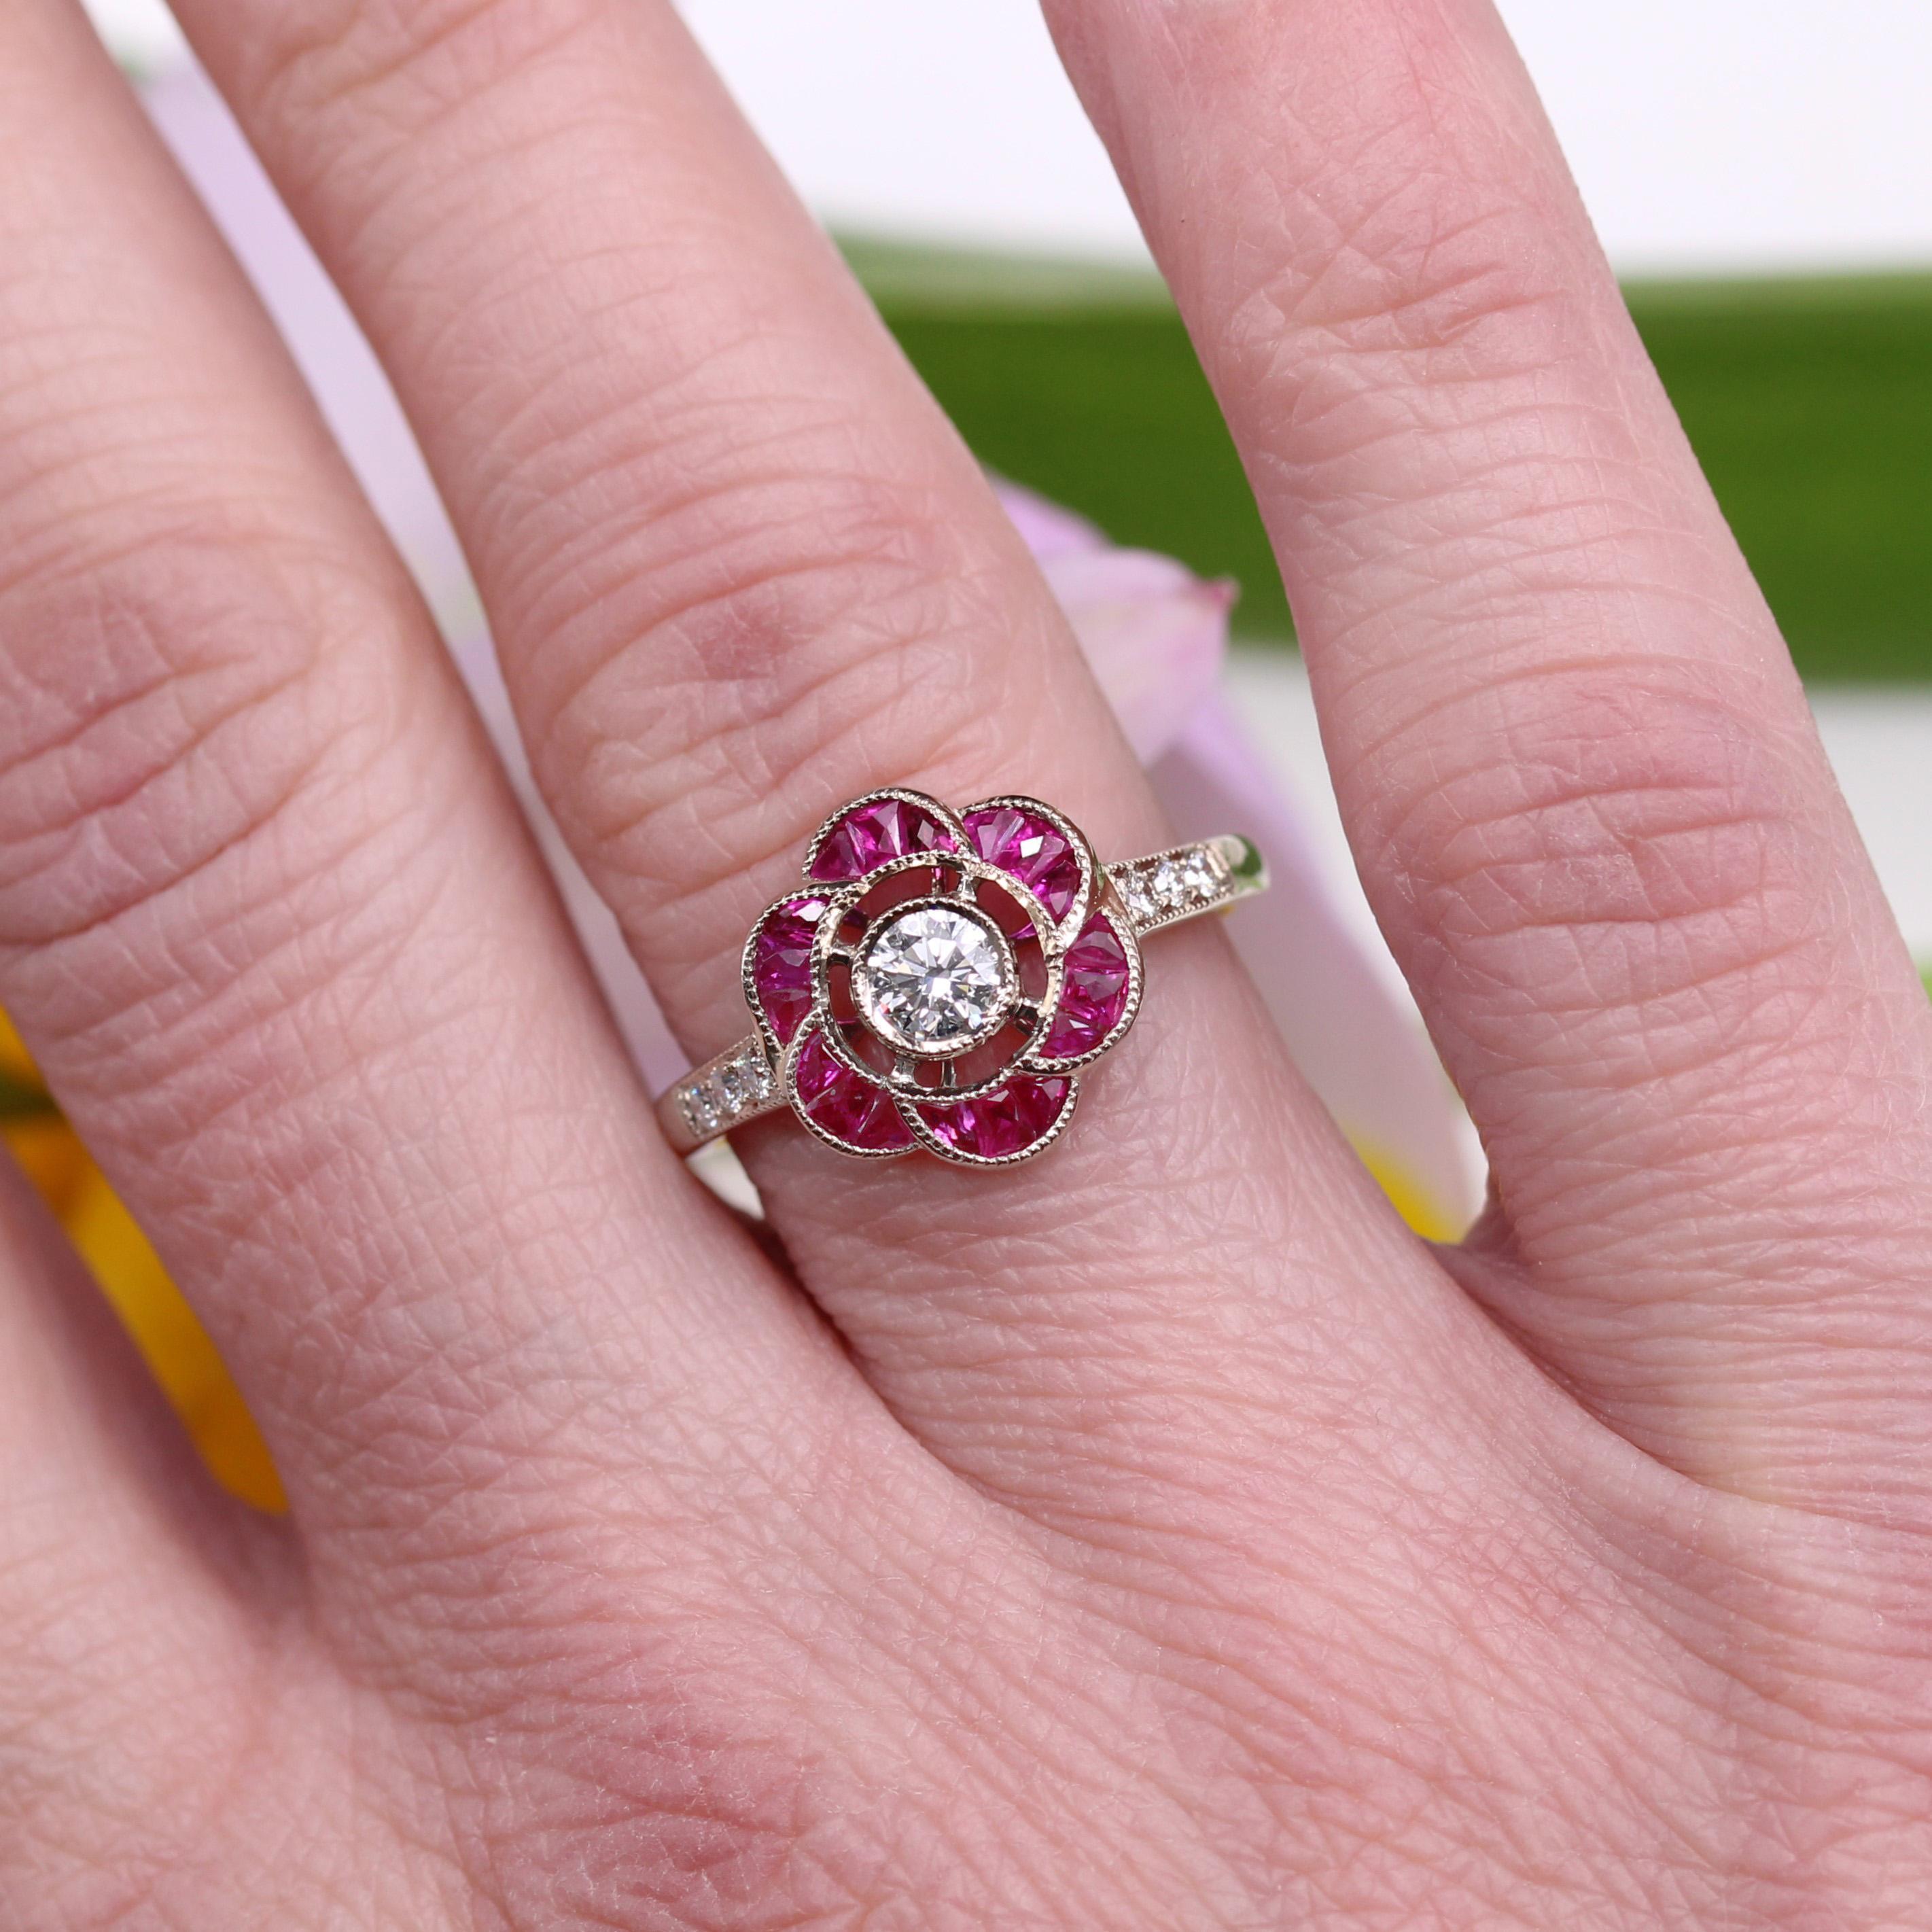 New Art Deco Style Calibrated Rubies Diamonds 18 Karat White Gold Flower Ring For Sale 7